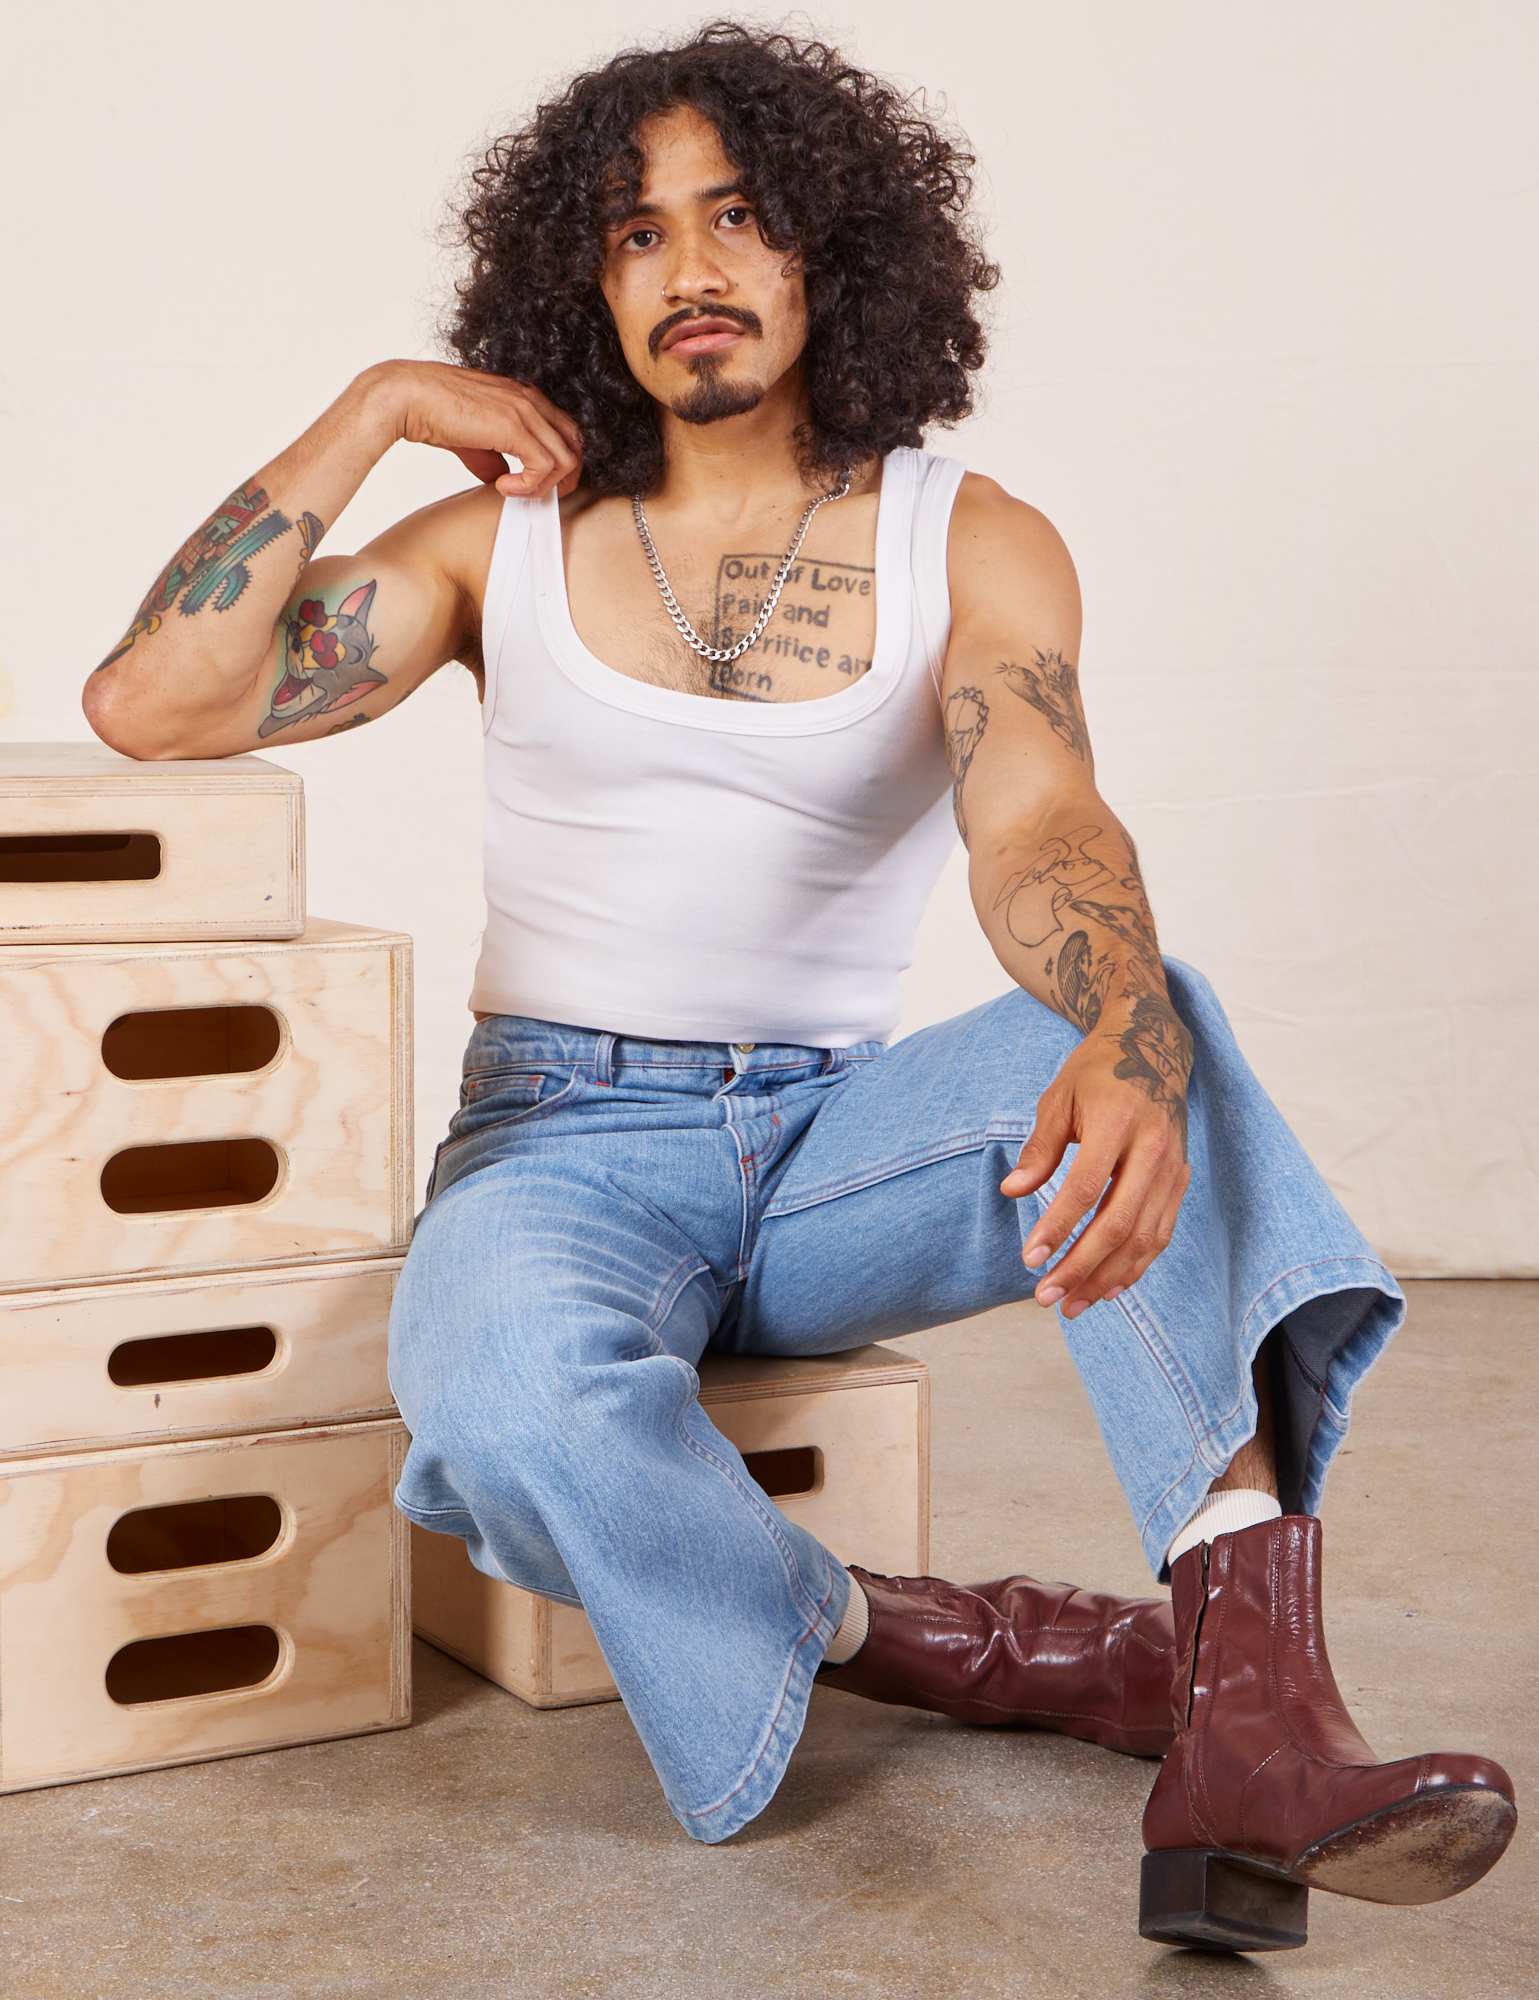 Jesse is wearing Cropped Tank Top in Vintage Tee Off-White and sitting on a wooden crate